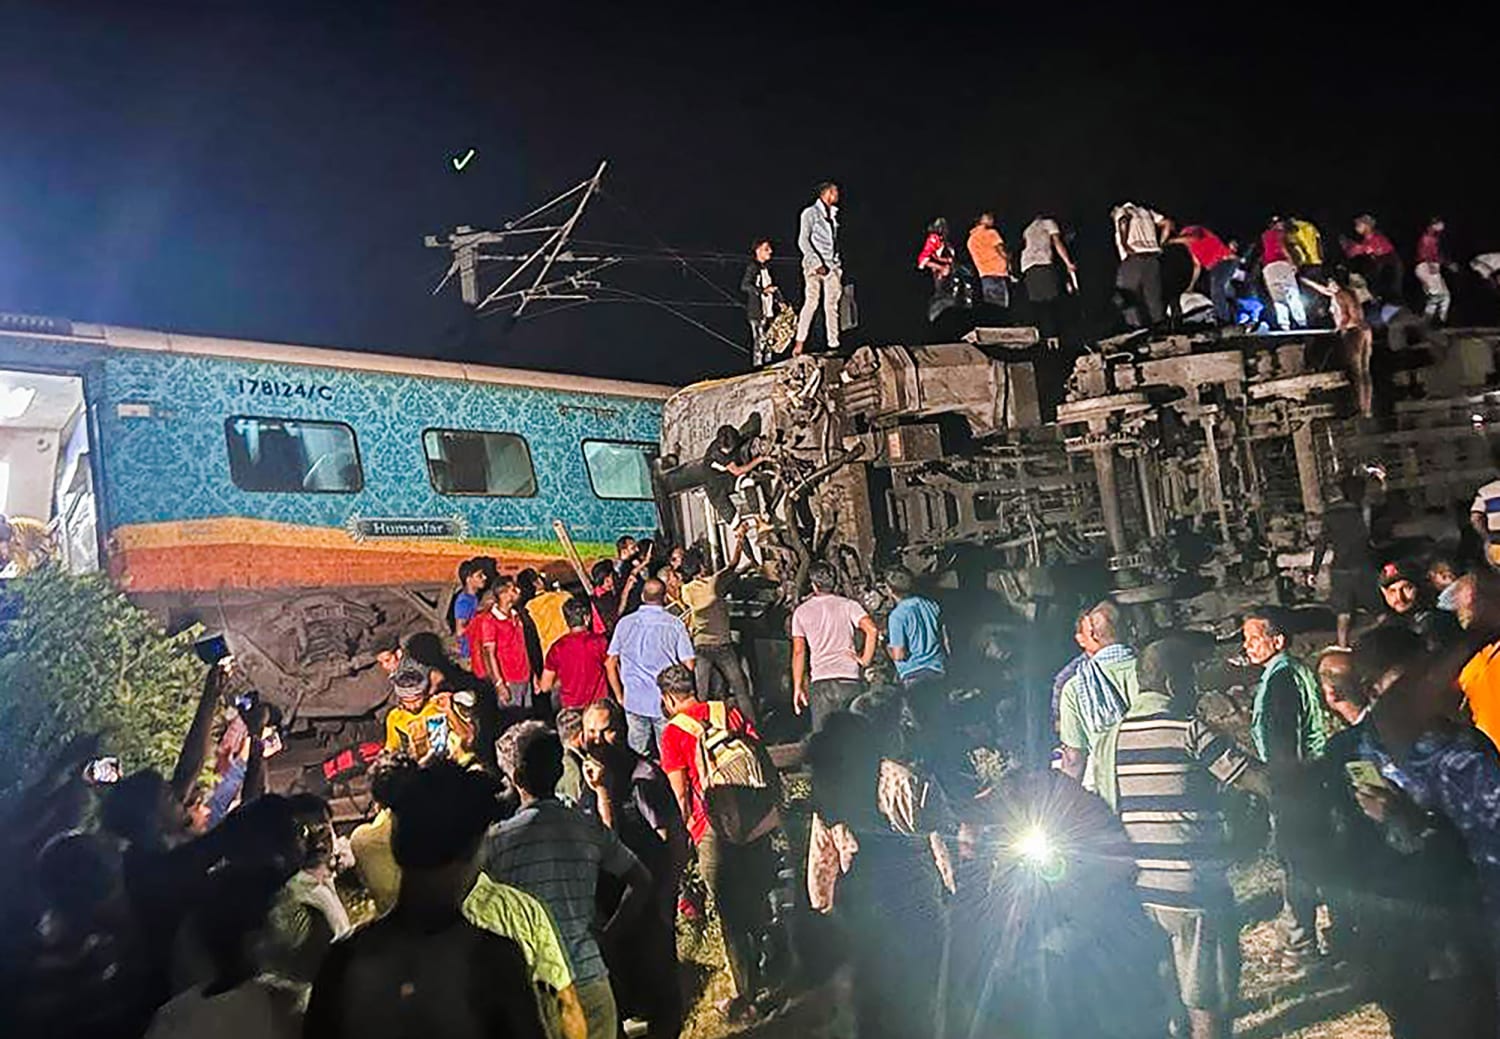 More than 280 dead, 900 injured after passenger trains derail in India, officials say